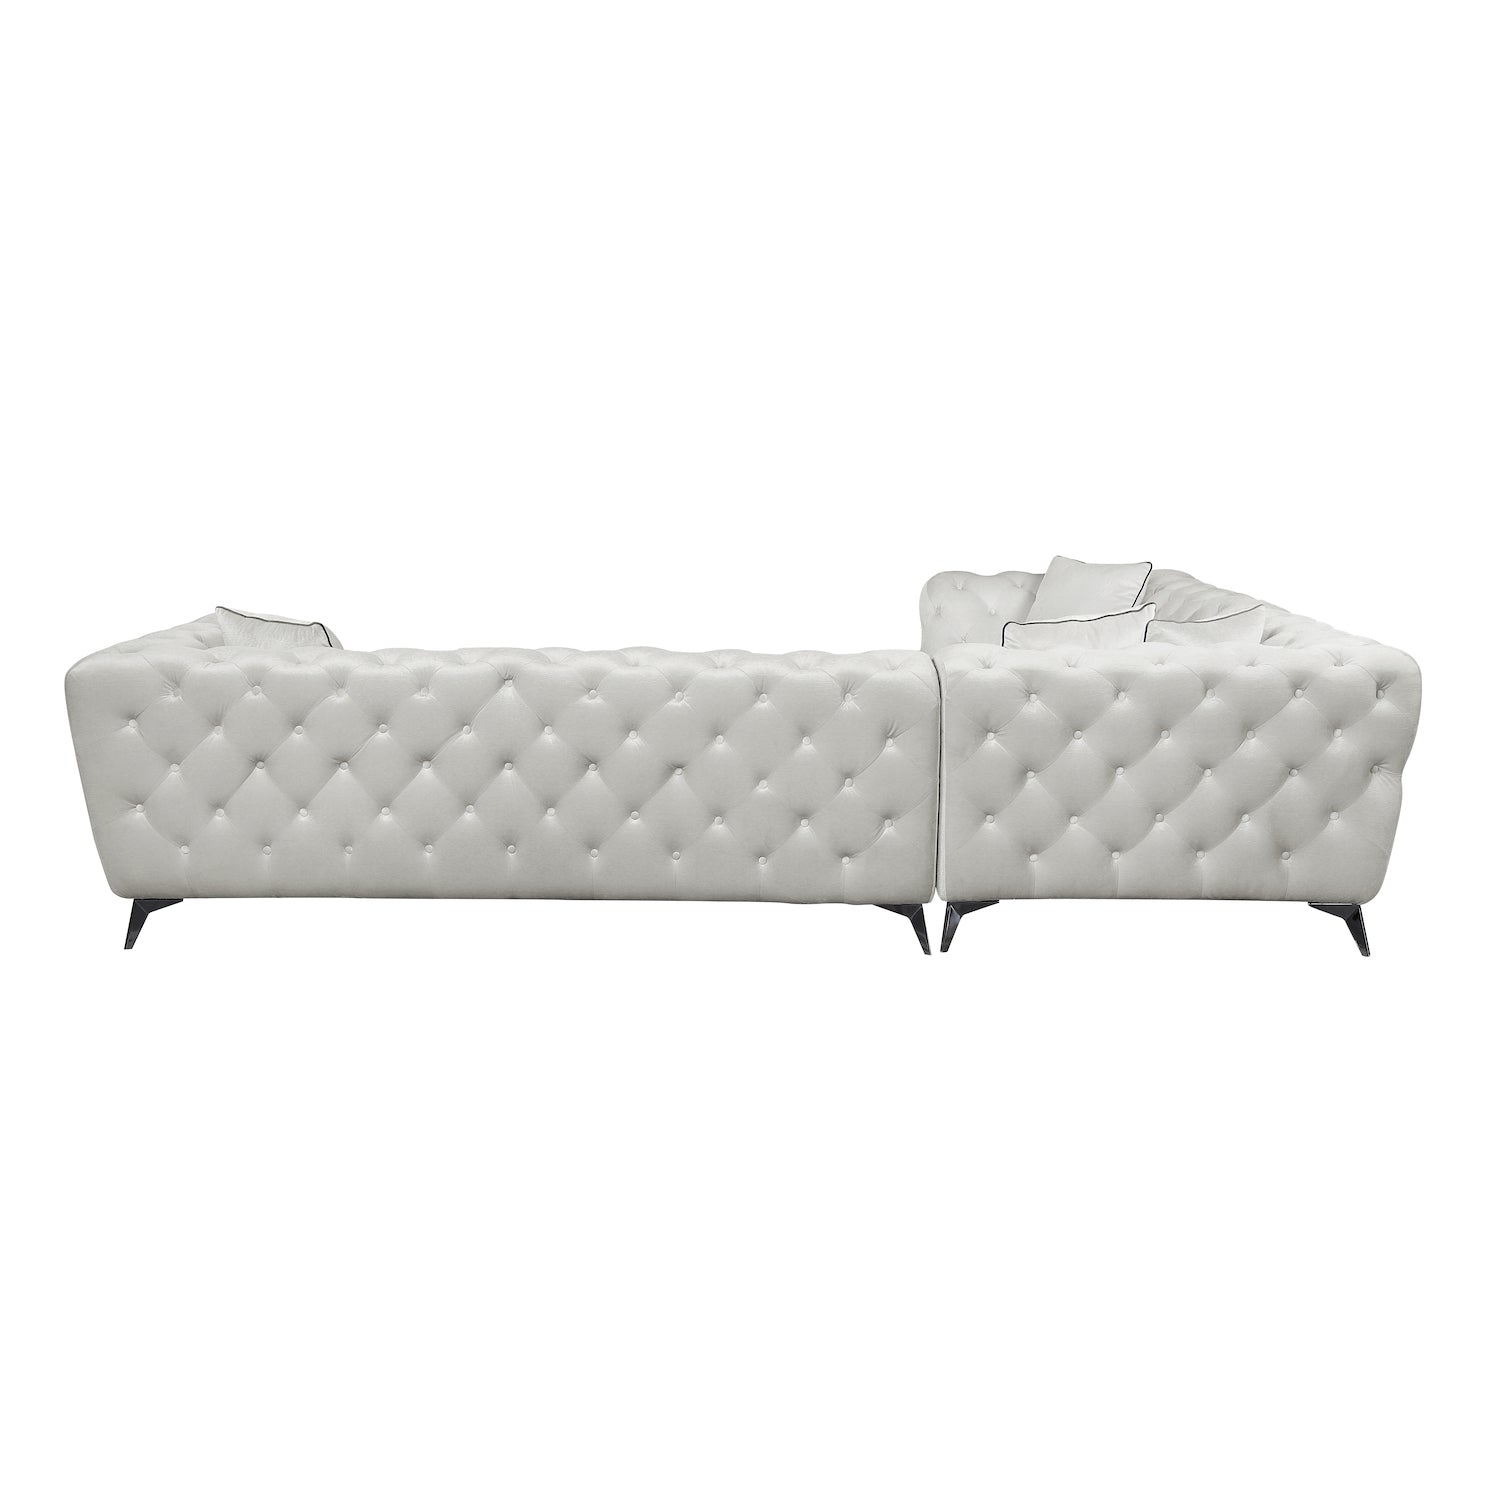 Atronia 133" Modern Tufted Sectional - Beige